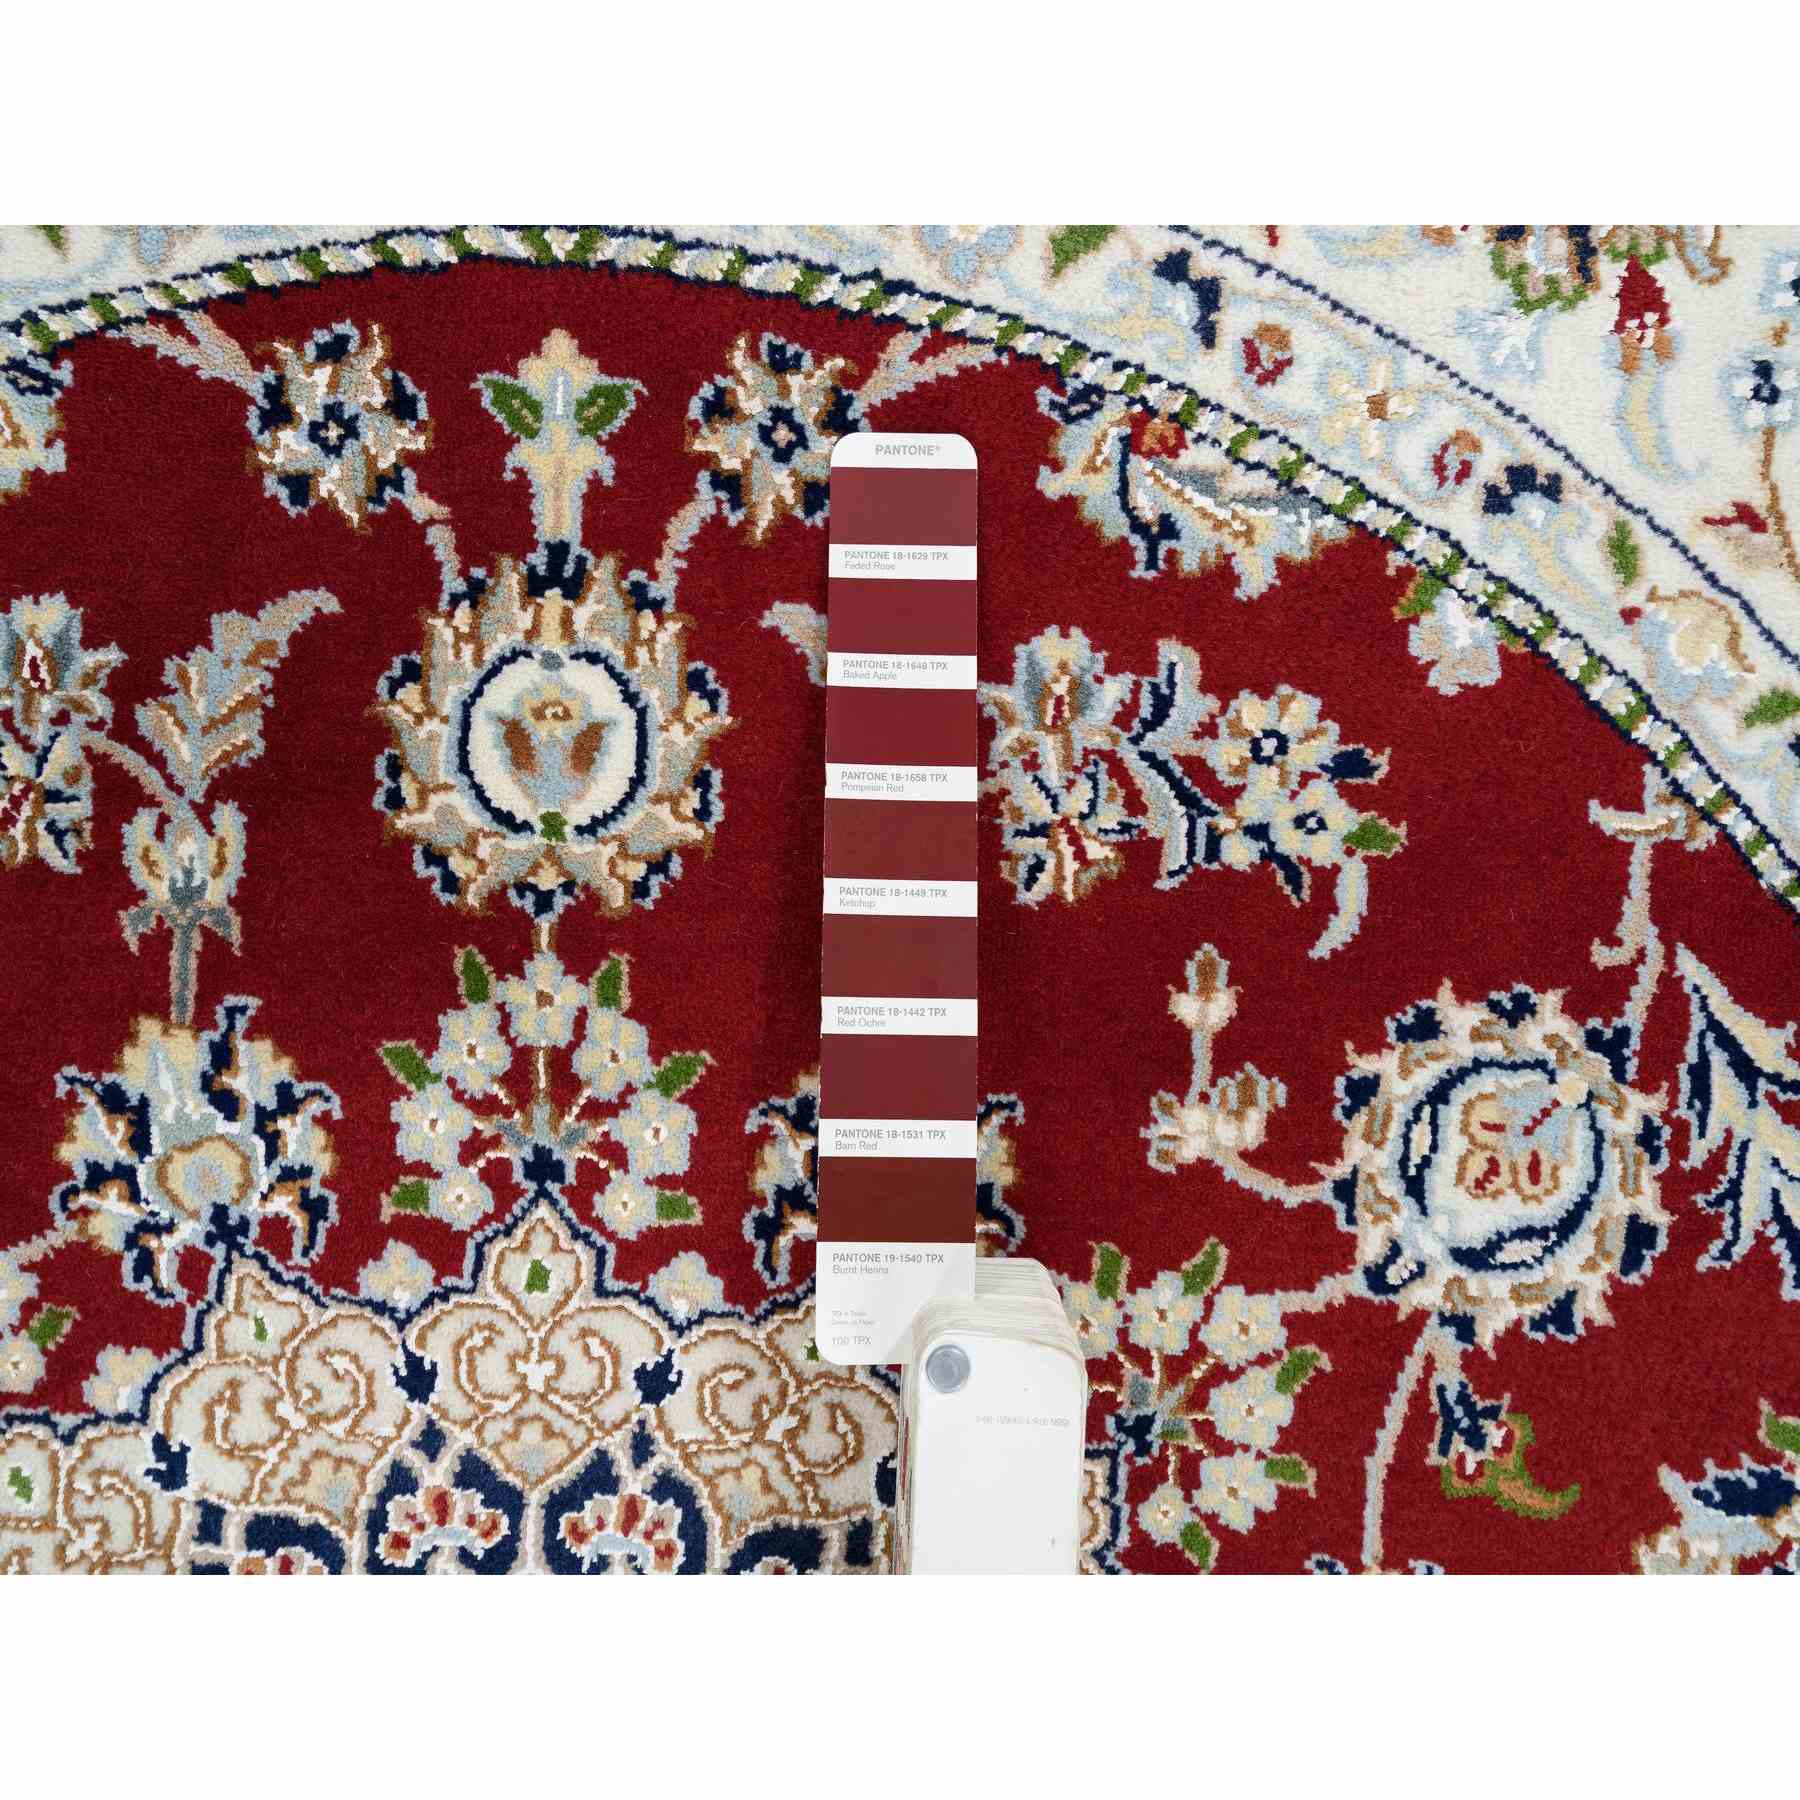 Fine-Oriental-Hand-Knotted-Rug-323755